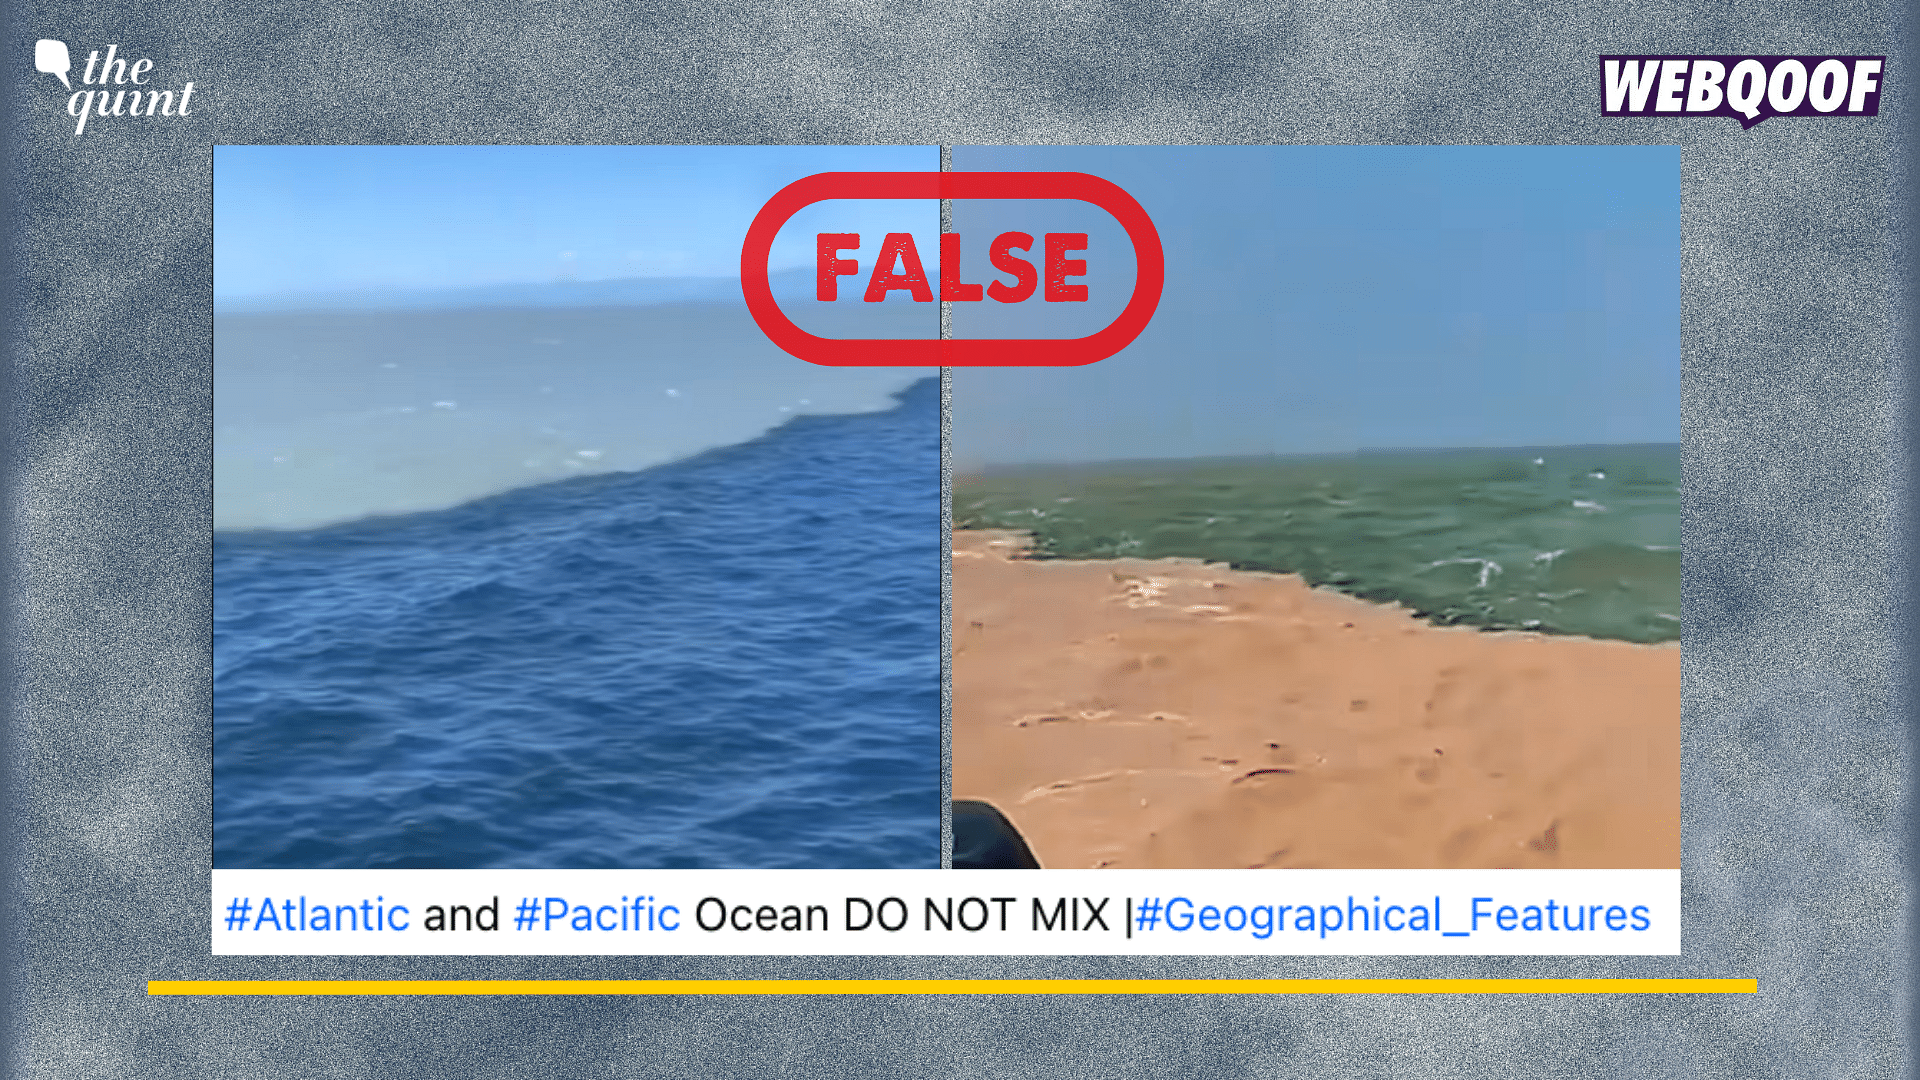 <div class="paragraphs"><p>Fact-Check: The video falsely claimed that the two oceans do not mix together.&nbsp;</p></div>